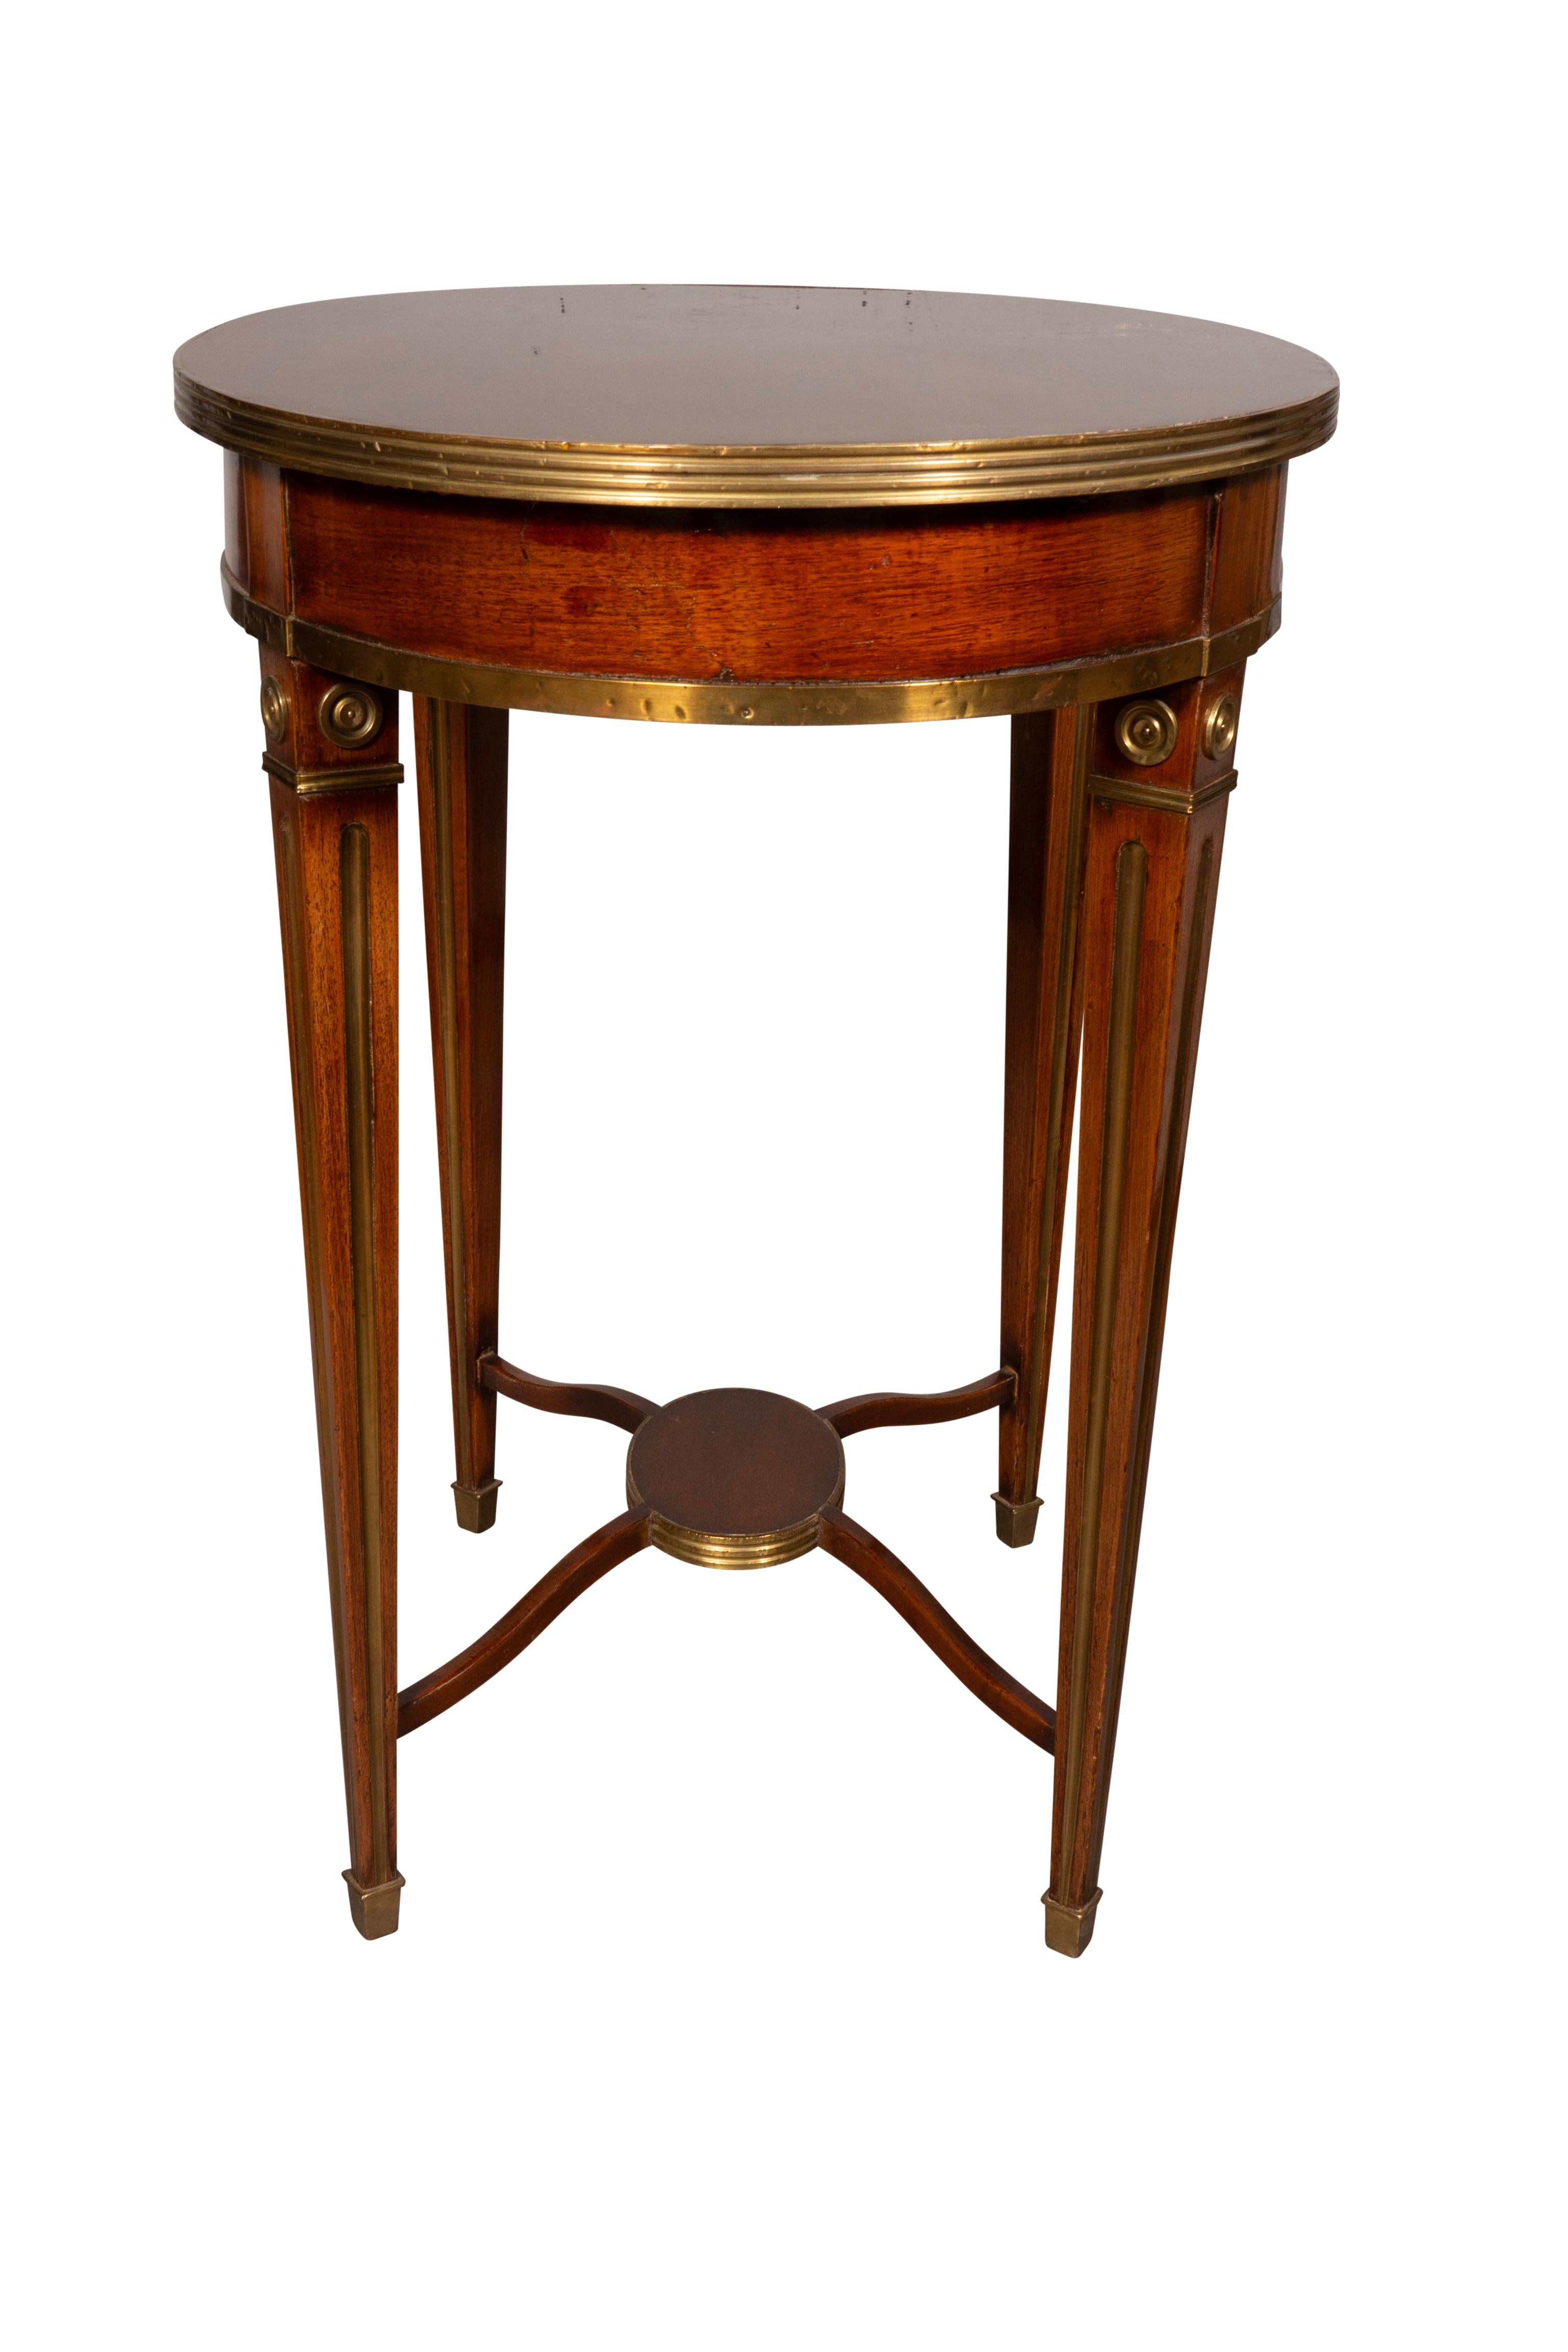 European Russian Mahogany And Brass Mounted Occasional Table For Sale